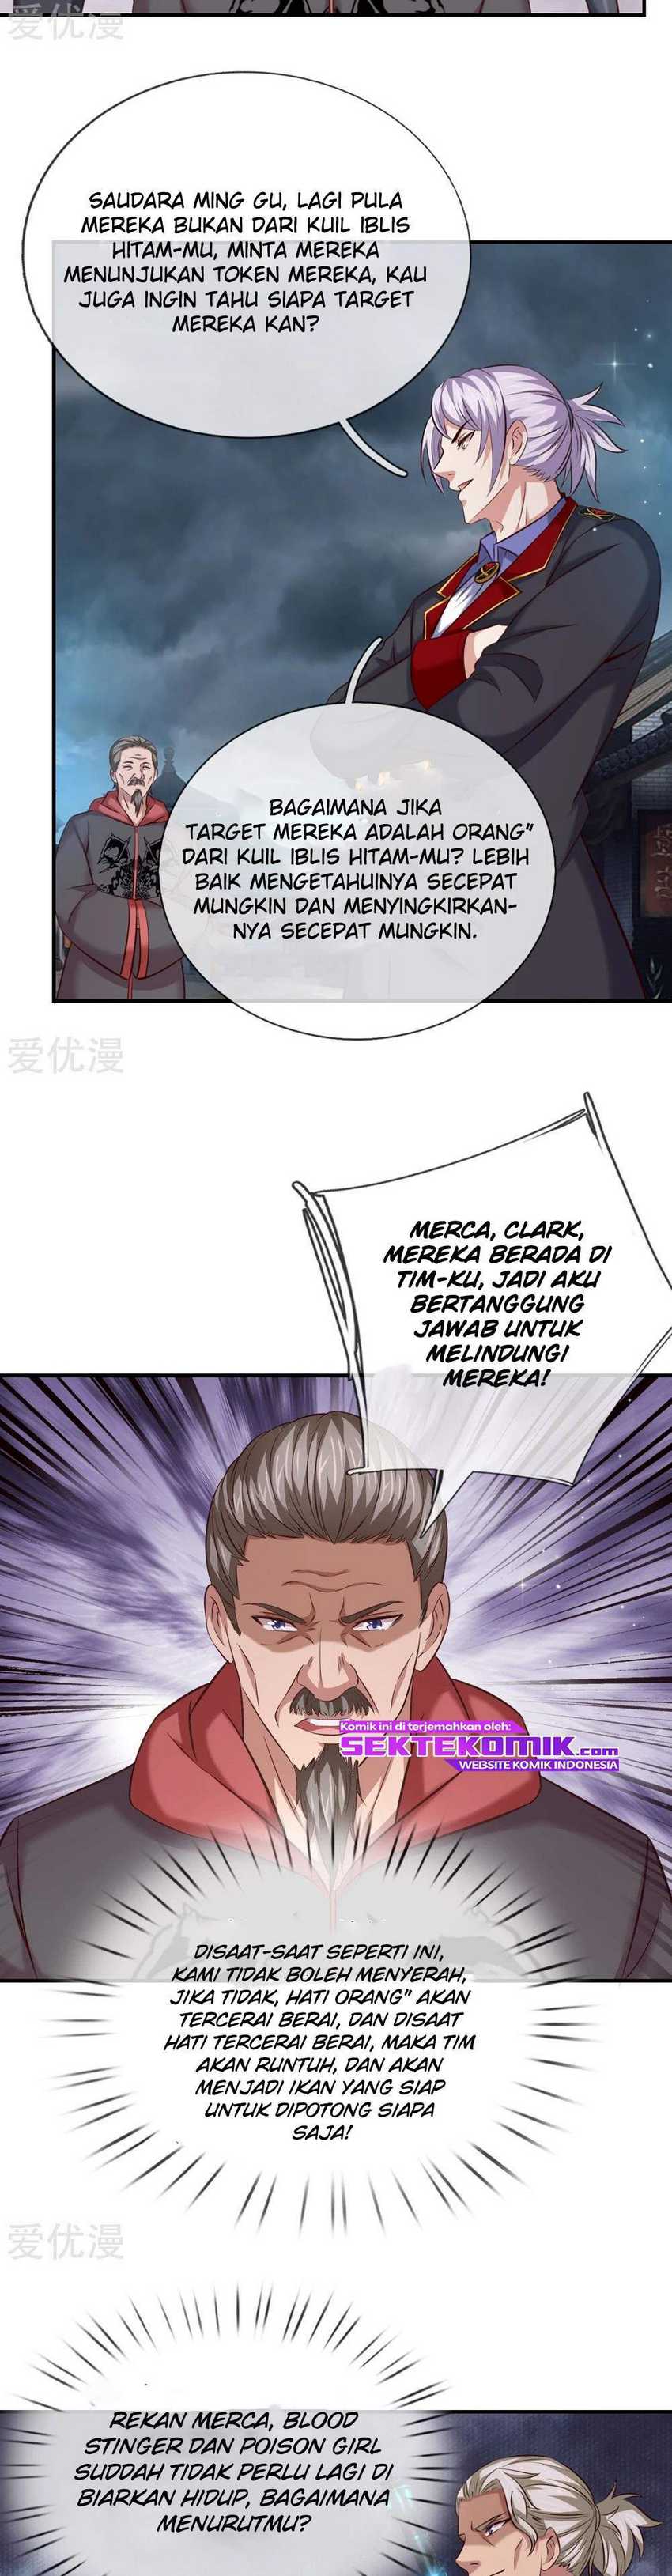 The Master of Knife Chapter 257